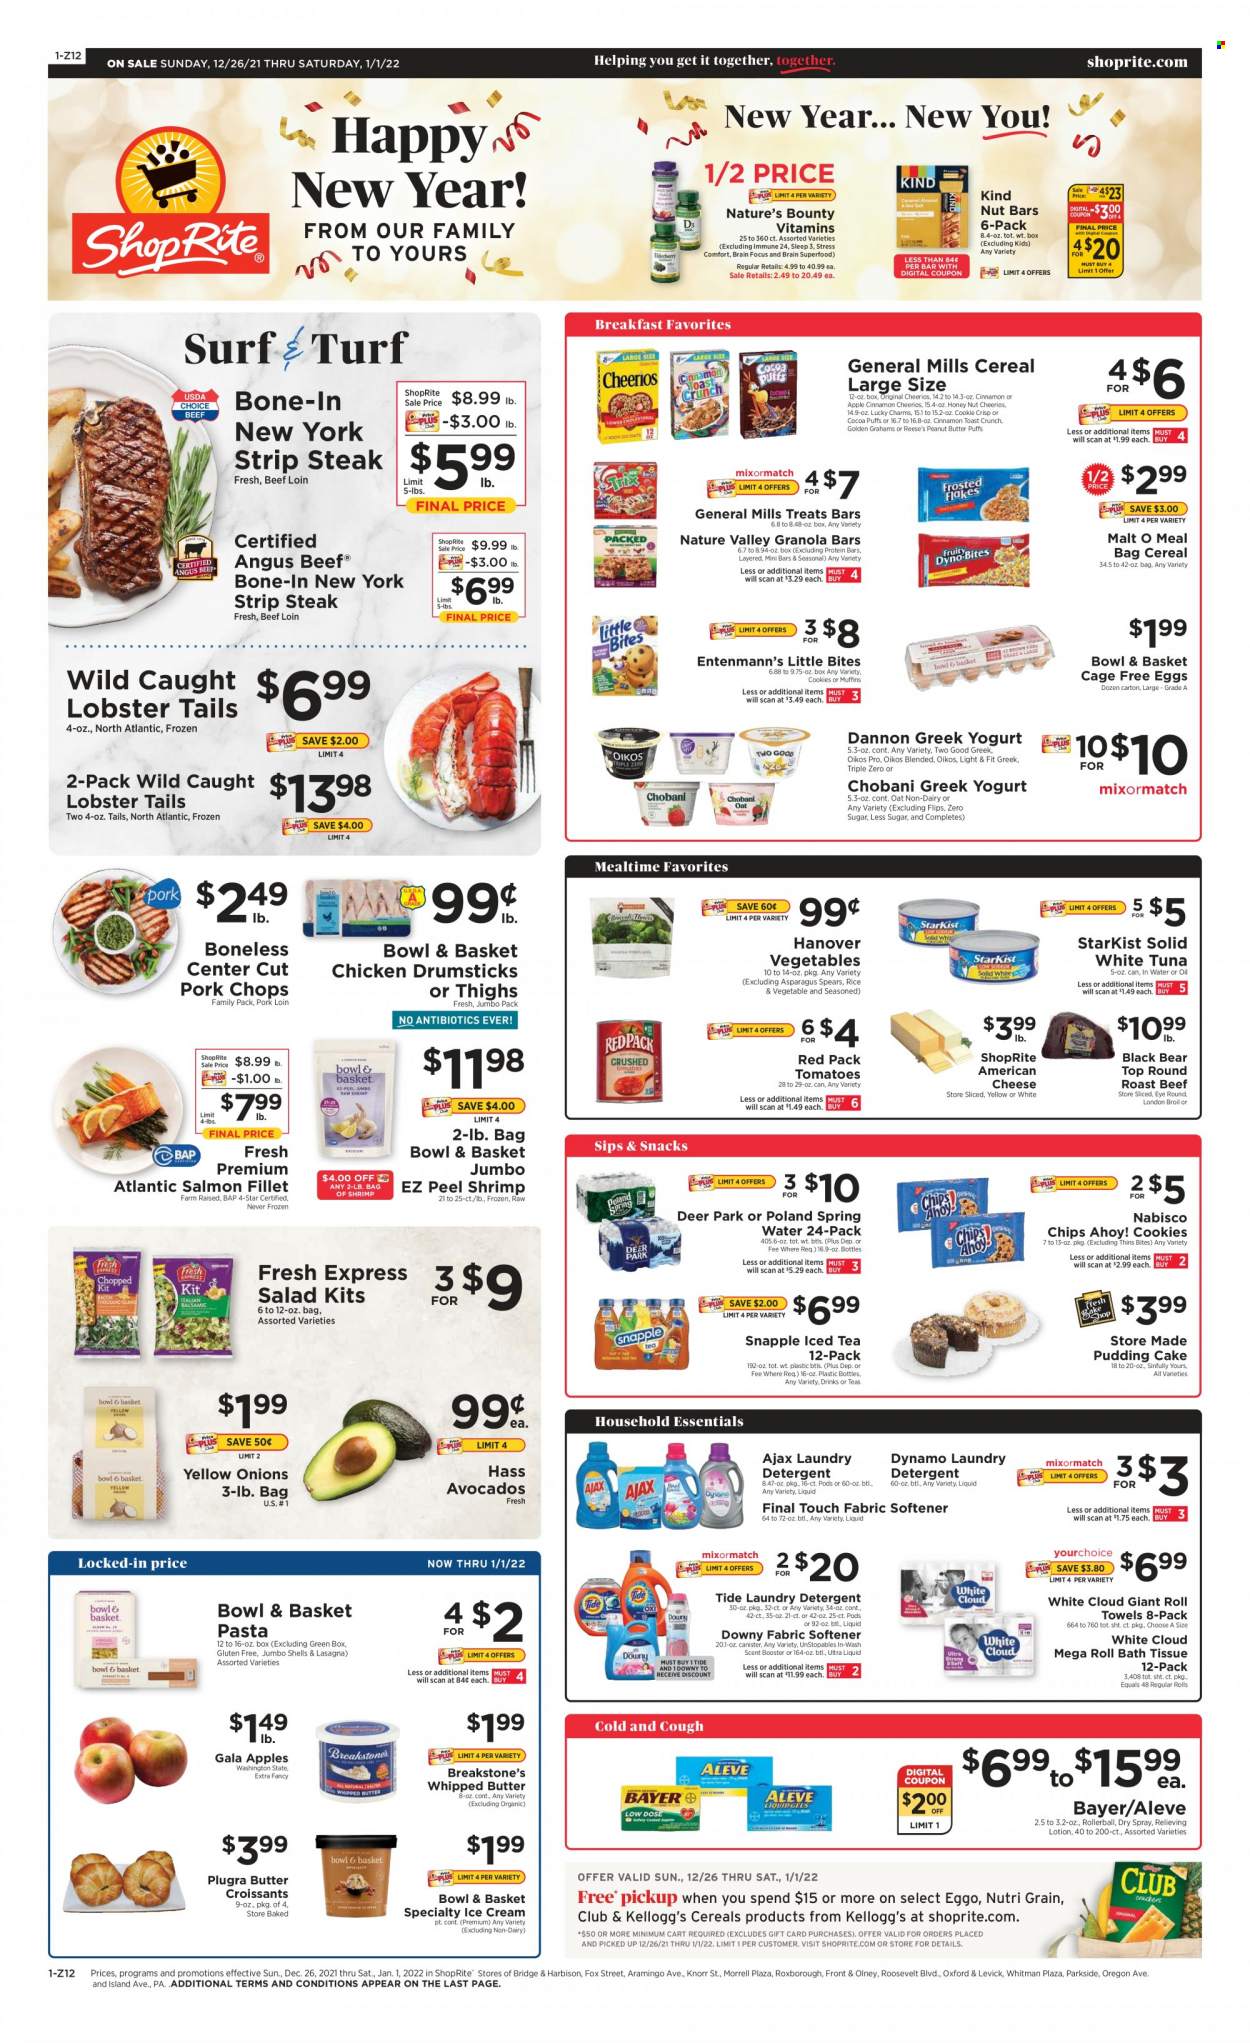 thumbnail - ShopRite Flyer - 12/26/2021 - 01/01/2022 - Sales products - cake, Bowl & Basket, Entenmann's, asparagus, tomatoes, onion, salad, avocado, Gala, lobster, salmon, salmon fillet, tuna, lobster tail, shrimps, StarKist, pasta, Knorr, lasagna meal, american cheese, cheese, greek yoghurt, yoghurt, Oikos, Chobani, Dannon, eggs, cage free eggs, whipped butter, ice cream, Reese's, cookies, snack, Kellogg's, Chips Ahoy!, Little Bites, Thins, oats, cereals, Cheerios, protein bar, nut bar, granola bar, Nature Valley, Nutri-Grain, rice, peanut butter, ice tea, Snapple, spring water, chicken drumsticks, beef meat, steak, round roast, roast beef, striploin steak, pork chops, pork loin, pork meat, bath tissue, paper towels, detergent, Ajax, Tide, Unstopables, fabric softener, laundry detergent, Surf, Downy Laundry, body lotion, Aleve, Nature's Bounty, Bayer. Page 3.